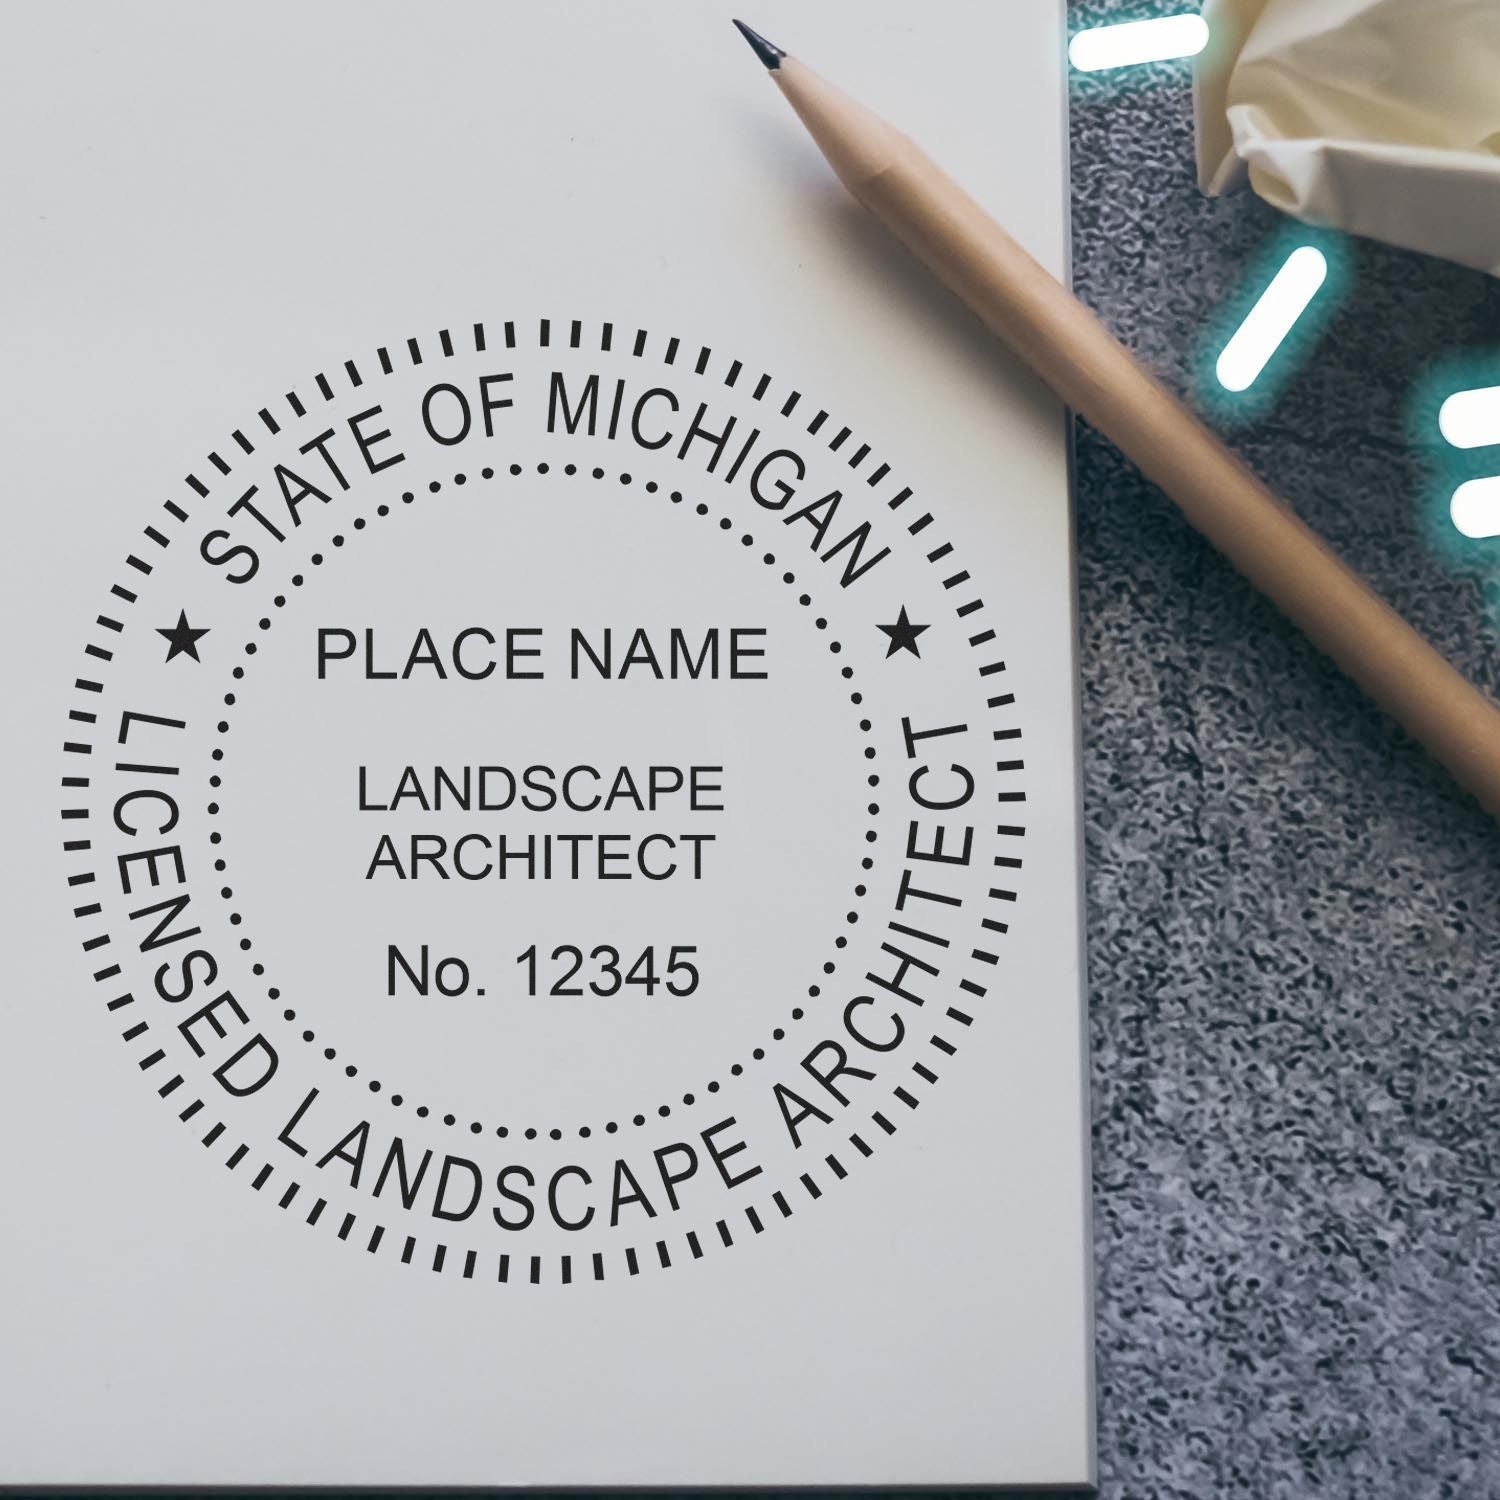 Premium MaxLight Pre-Inked Michigan Landscape Architectural Stamp in use photo showing a stamped imprint of the Premium MaxLight Pre-Inked Michigan Landscape Architectural Stamp